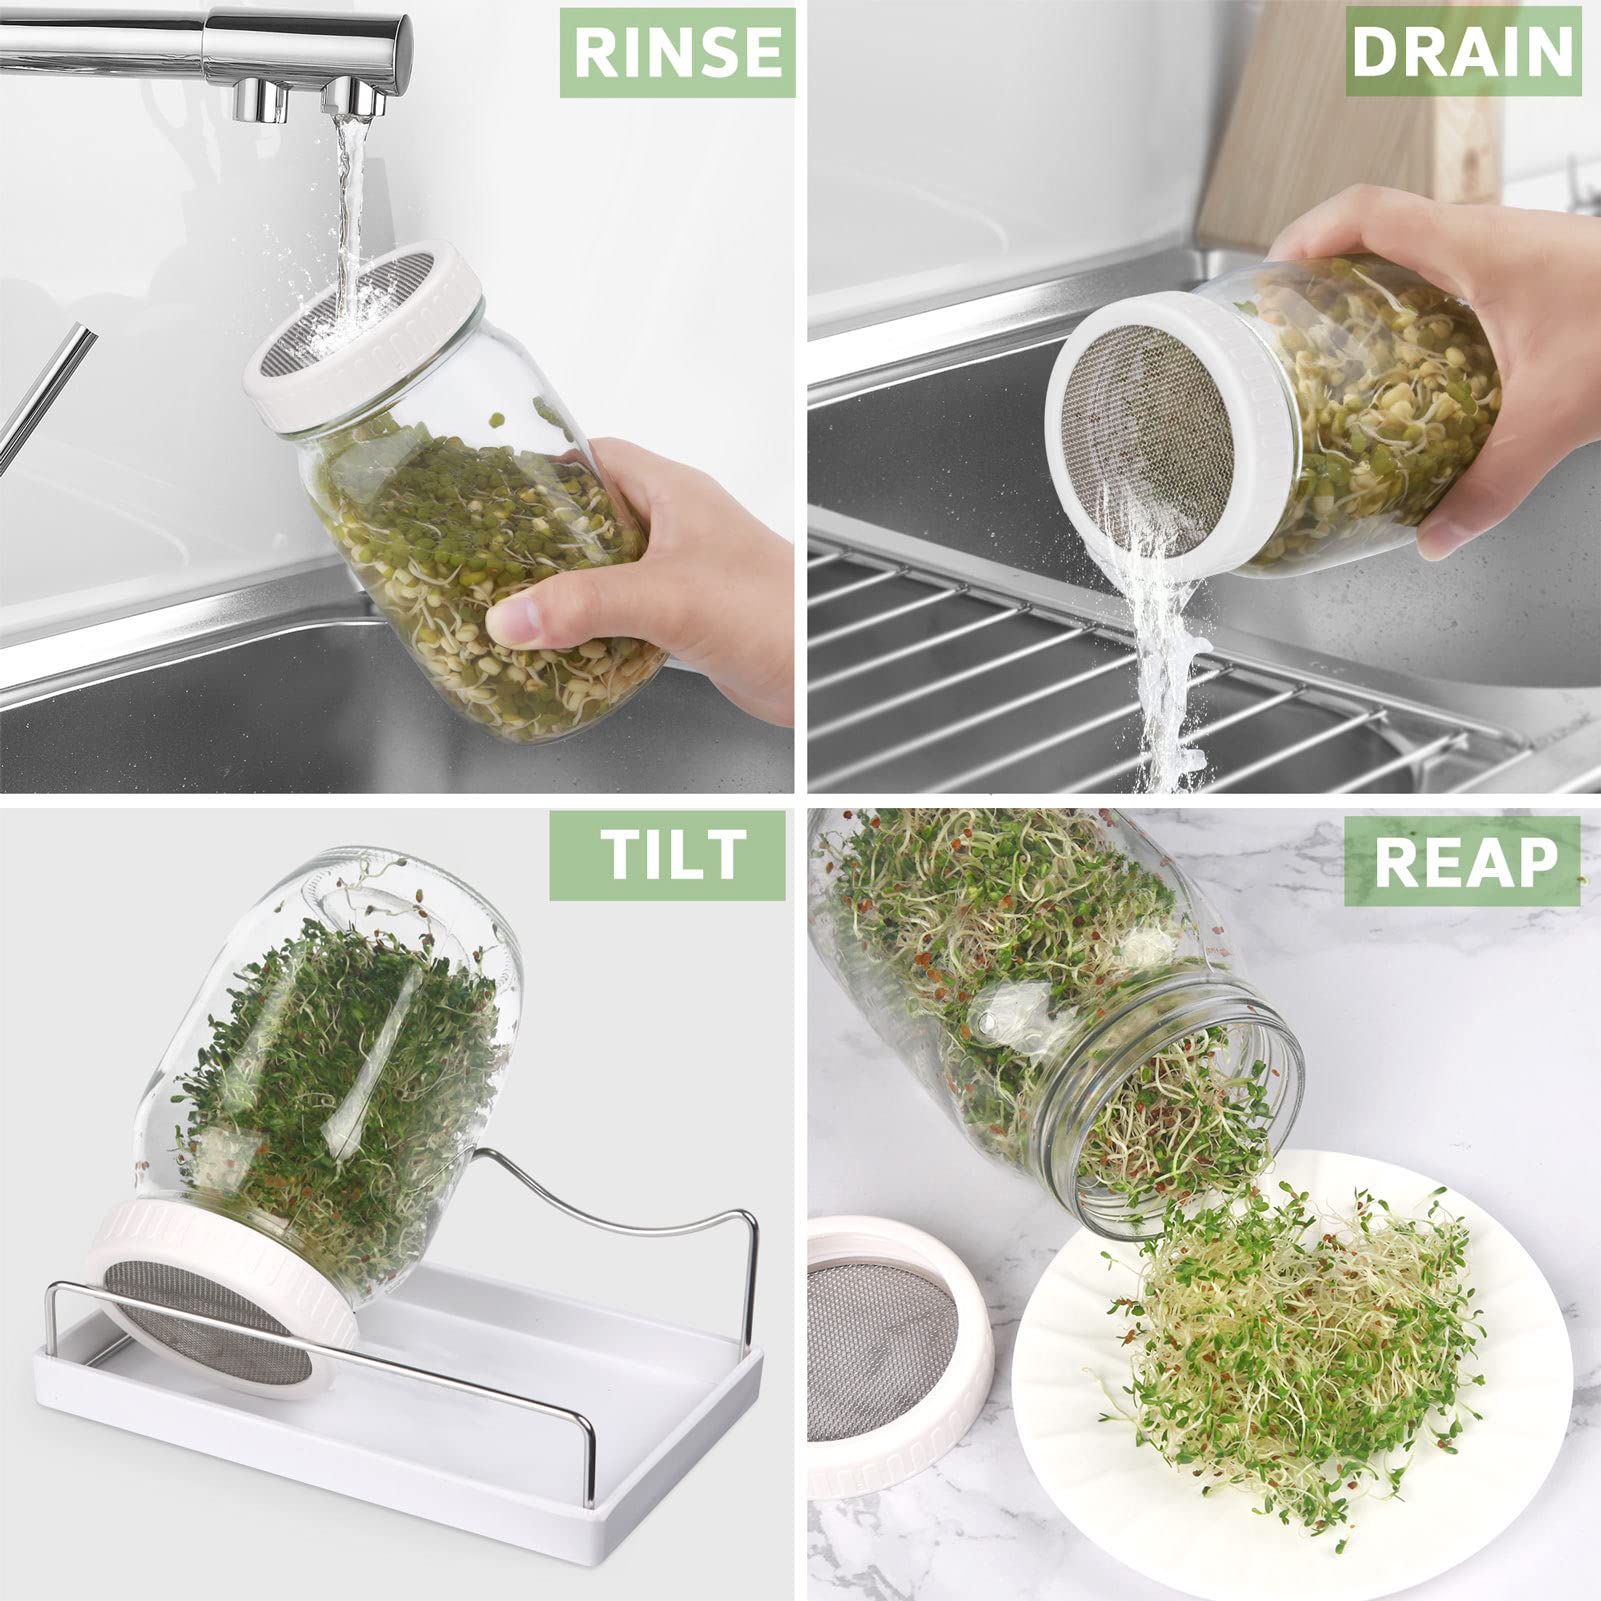 Complete Sprouting Jar Kit| 2 Wide Mouth Mason Jars, 316 Screen Sprout Lids, Blackout Sleeves, Tray, Stand| Sprouter Set for Growing Broccoli, Alfalfa and More-Seeds not Included